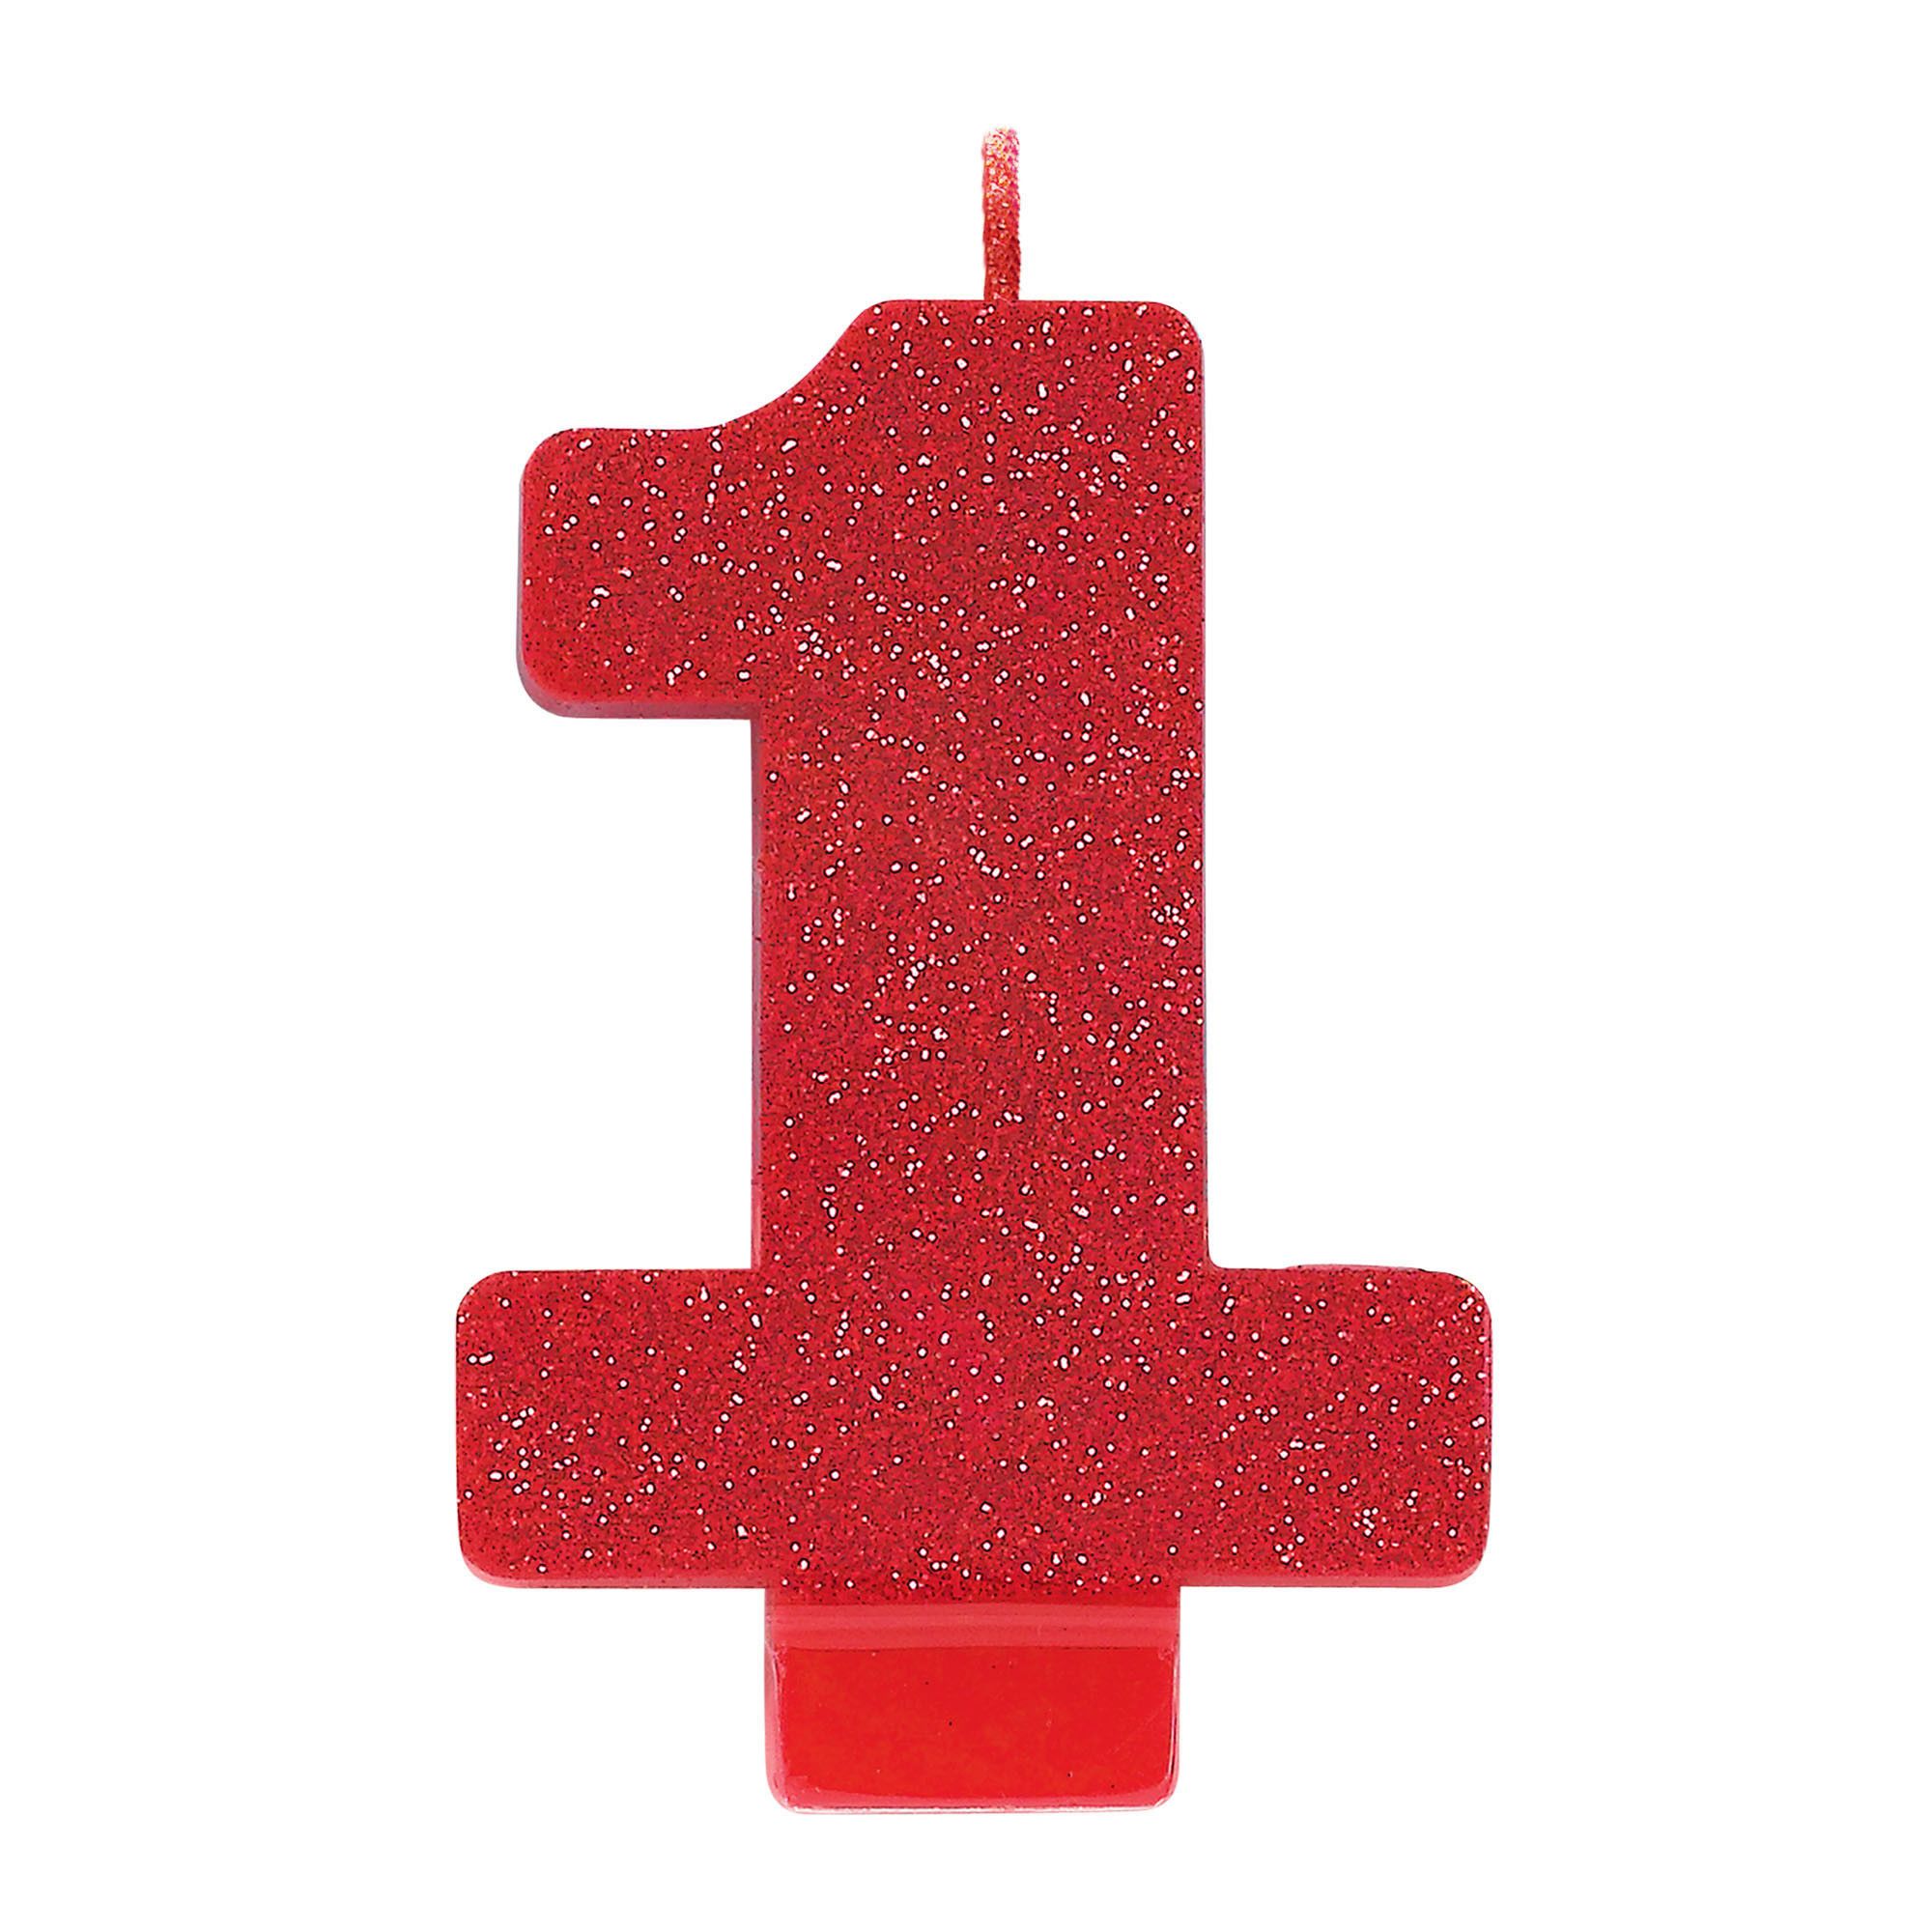 #1 Red glitter candle